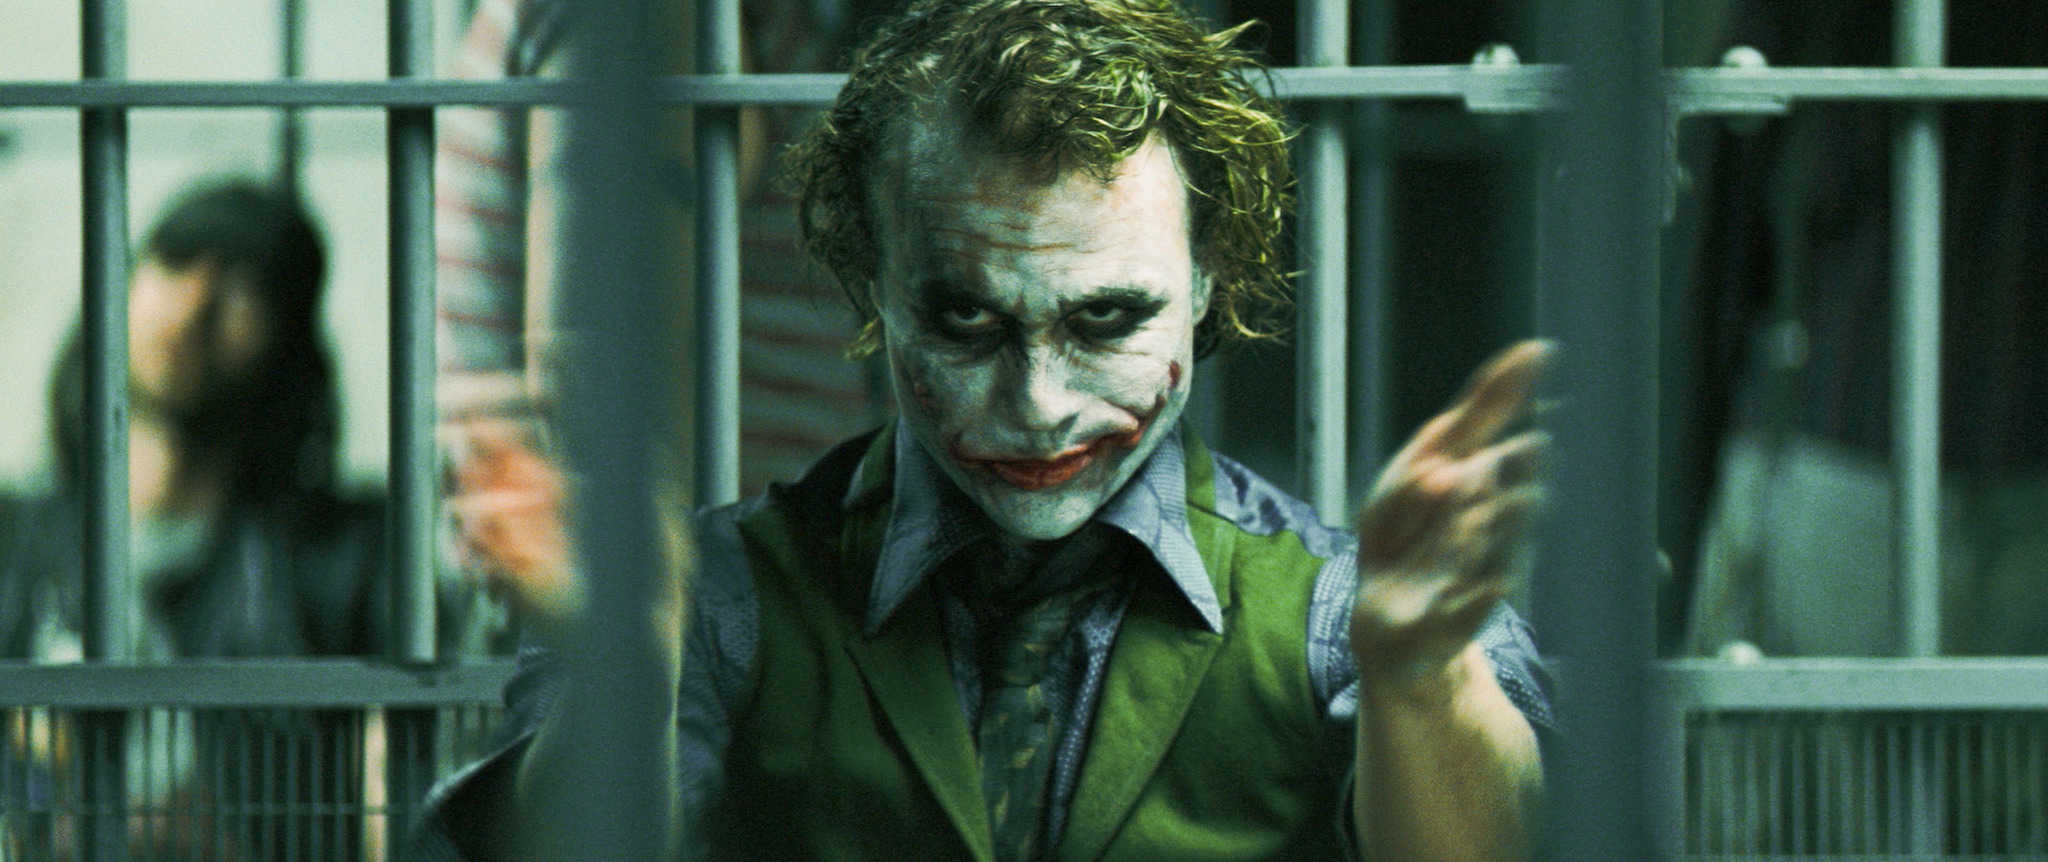 A man wearing face paint and clapping in this image from Warner Bros. Pictures.